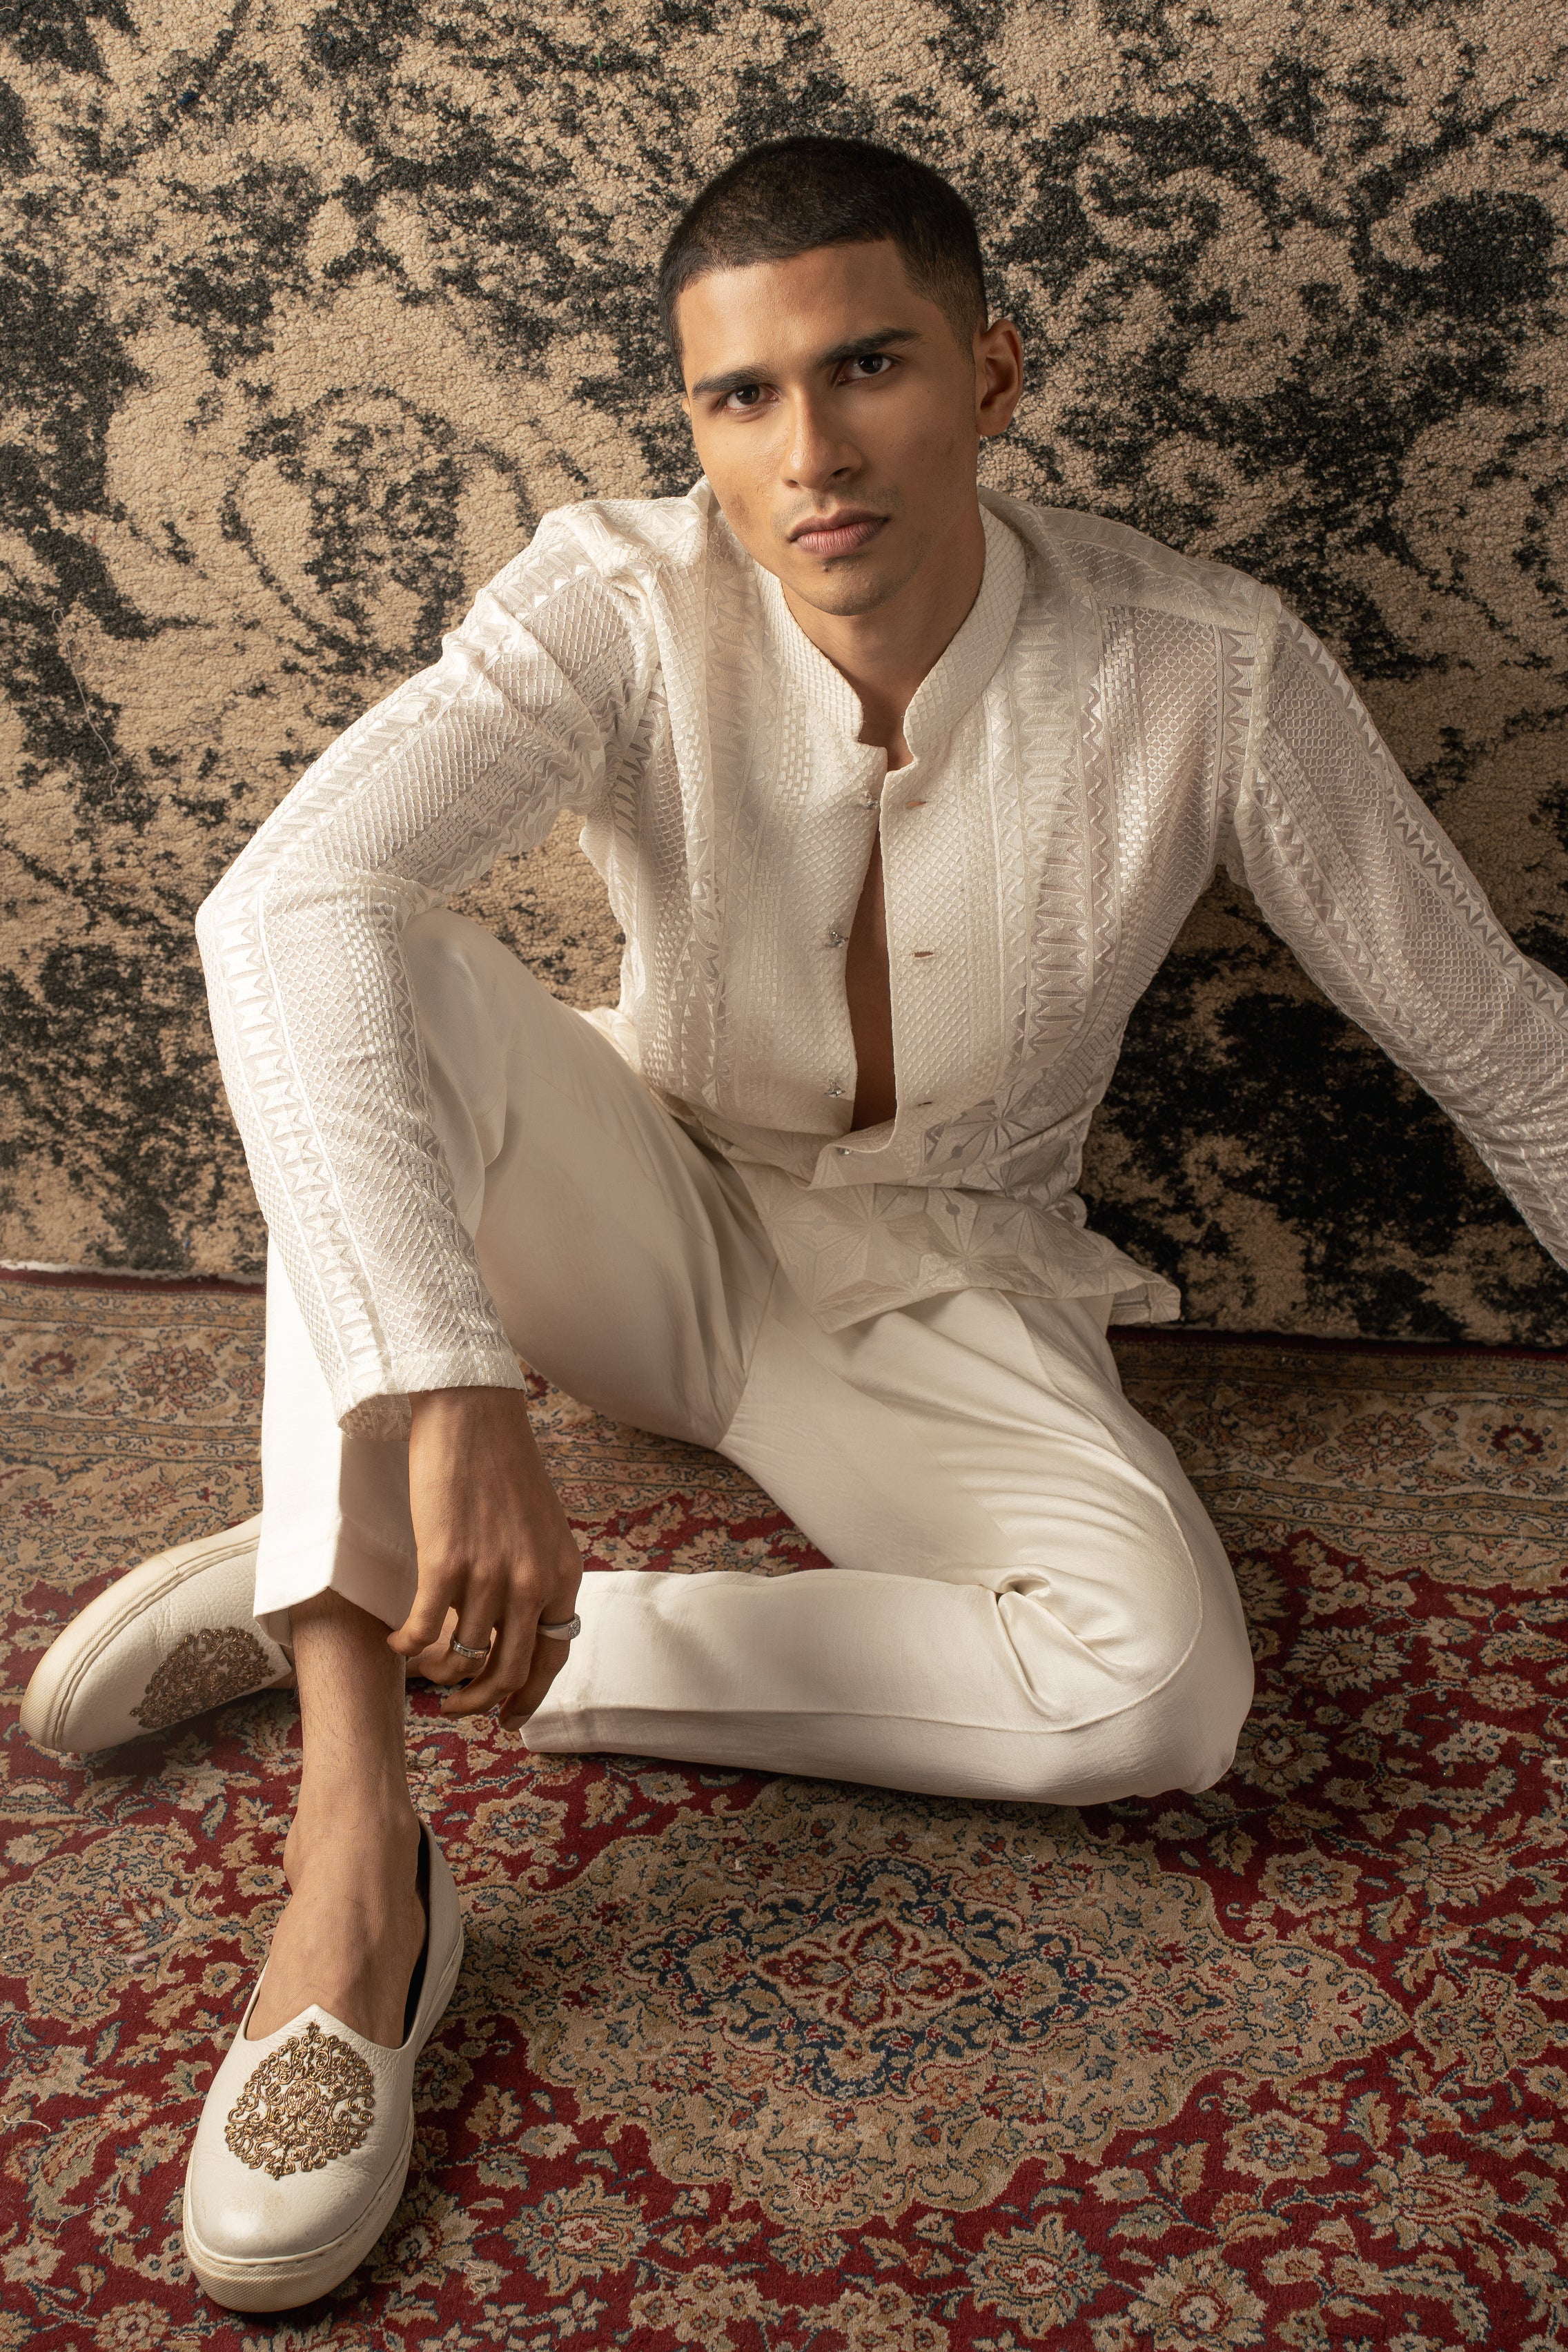 Chic minimalism in ivory: Silk georgette shirt effortlessly paired with satin linen pants for a timeless look.